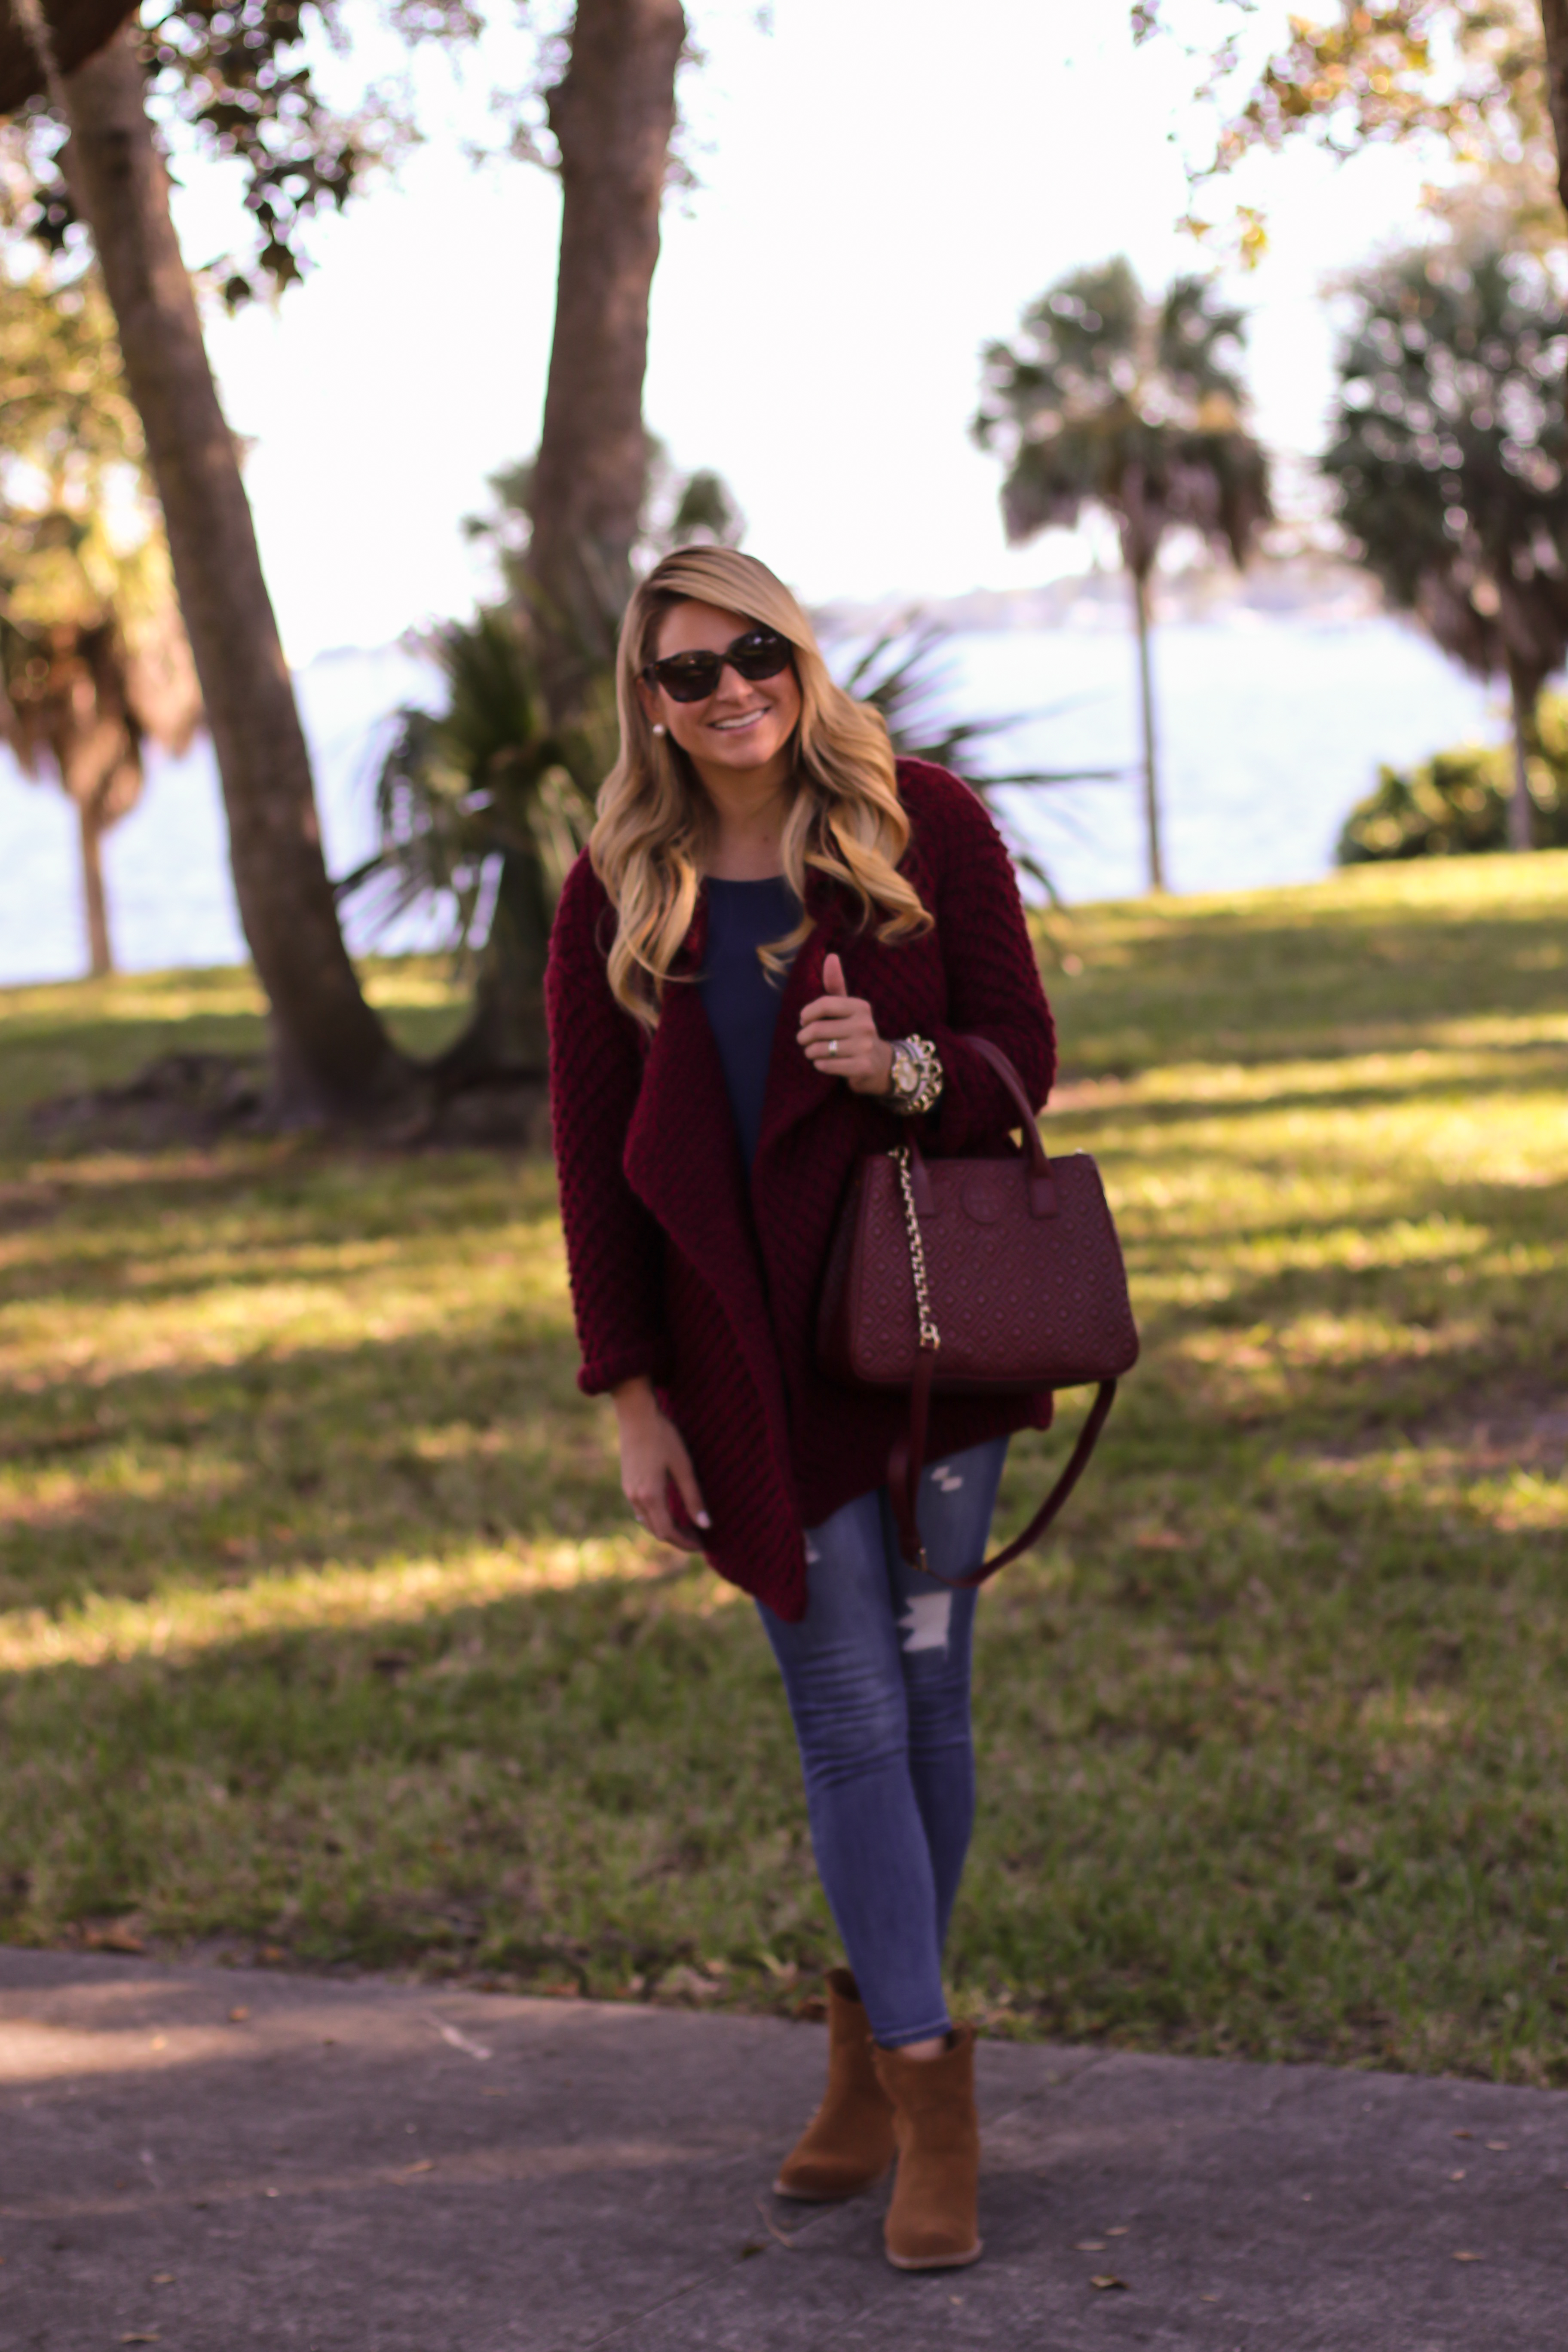 Chicwish sweter with nordstrom jeans piko top tory burch bag-2 - SHOP DANDY  | A florida based style and beauty blog by Danielle